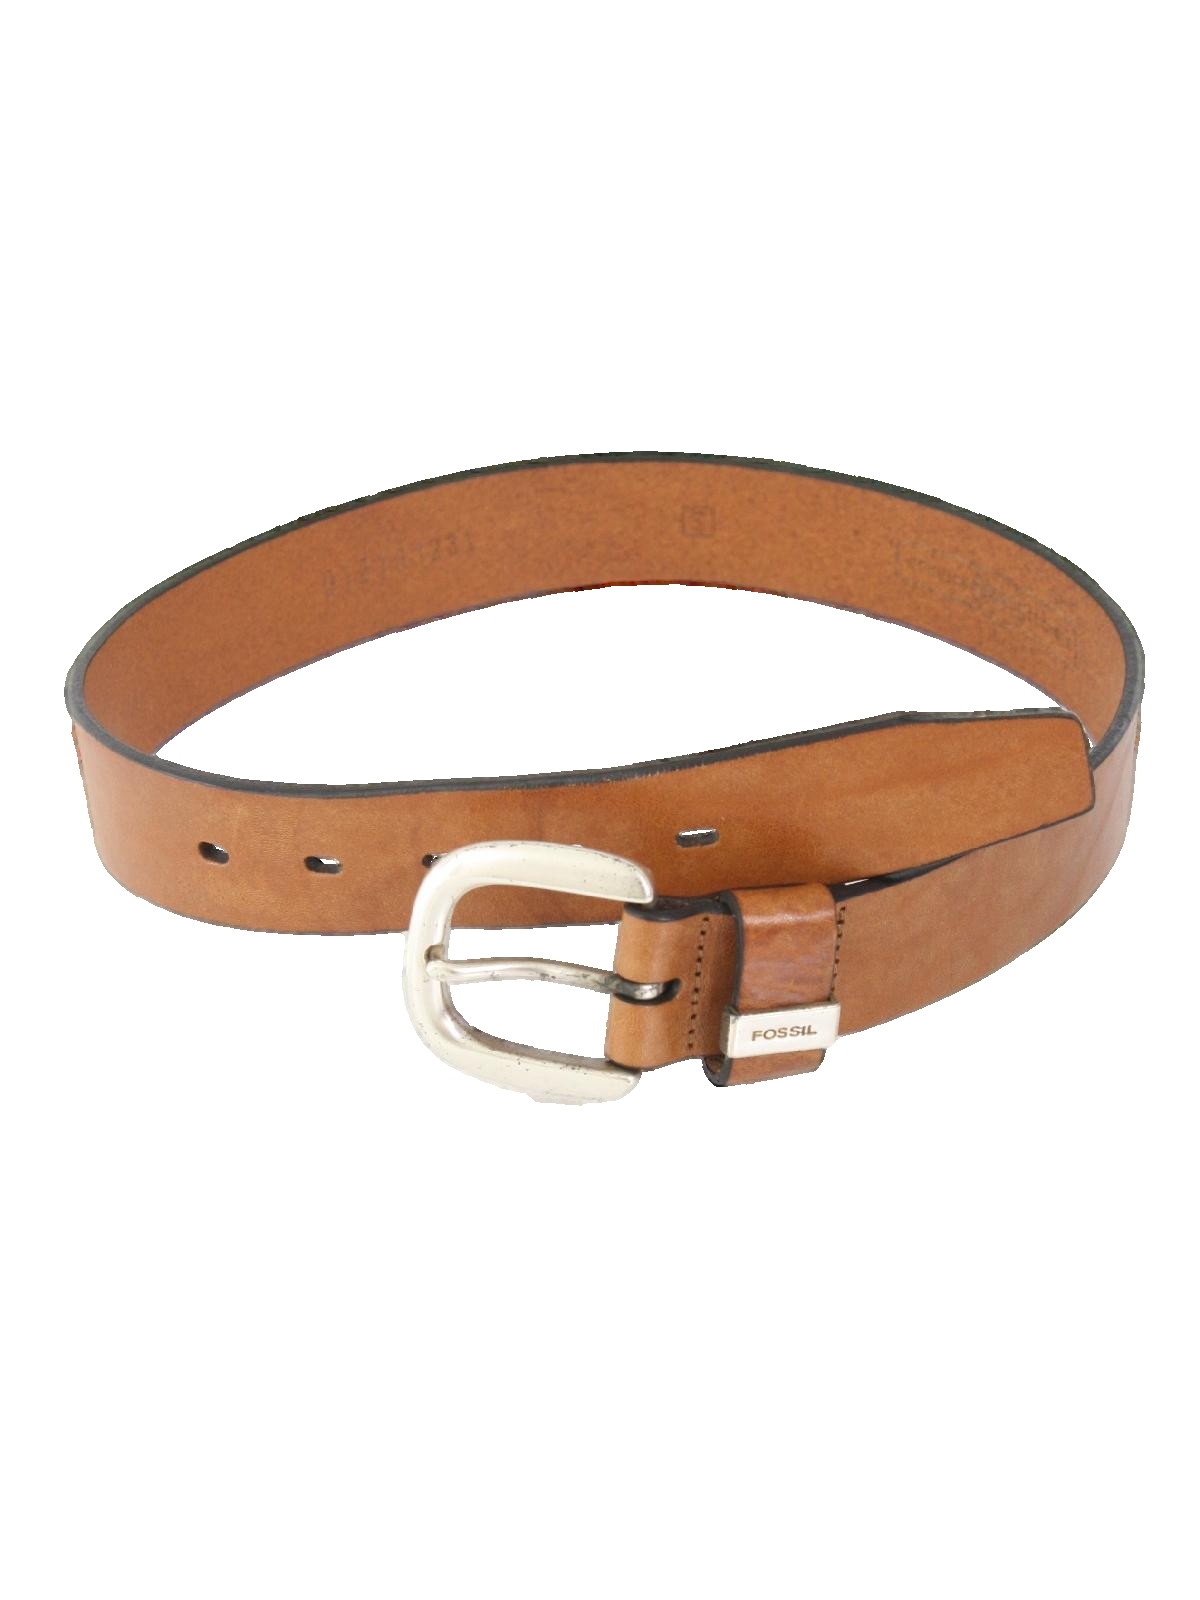 Belt: 90s -Fossil- Womens brown background leather belt with silver ...